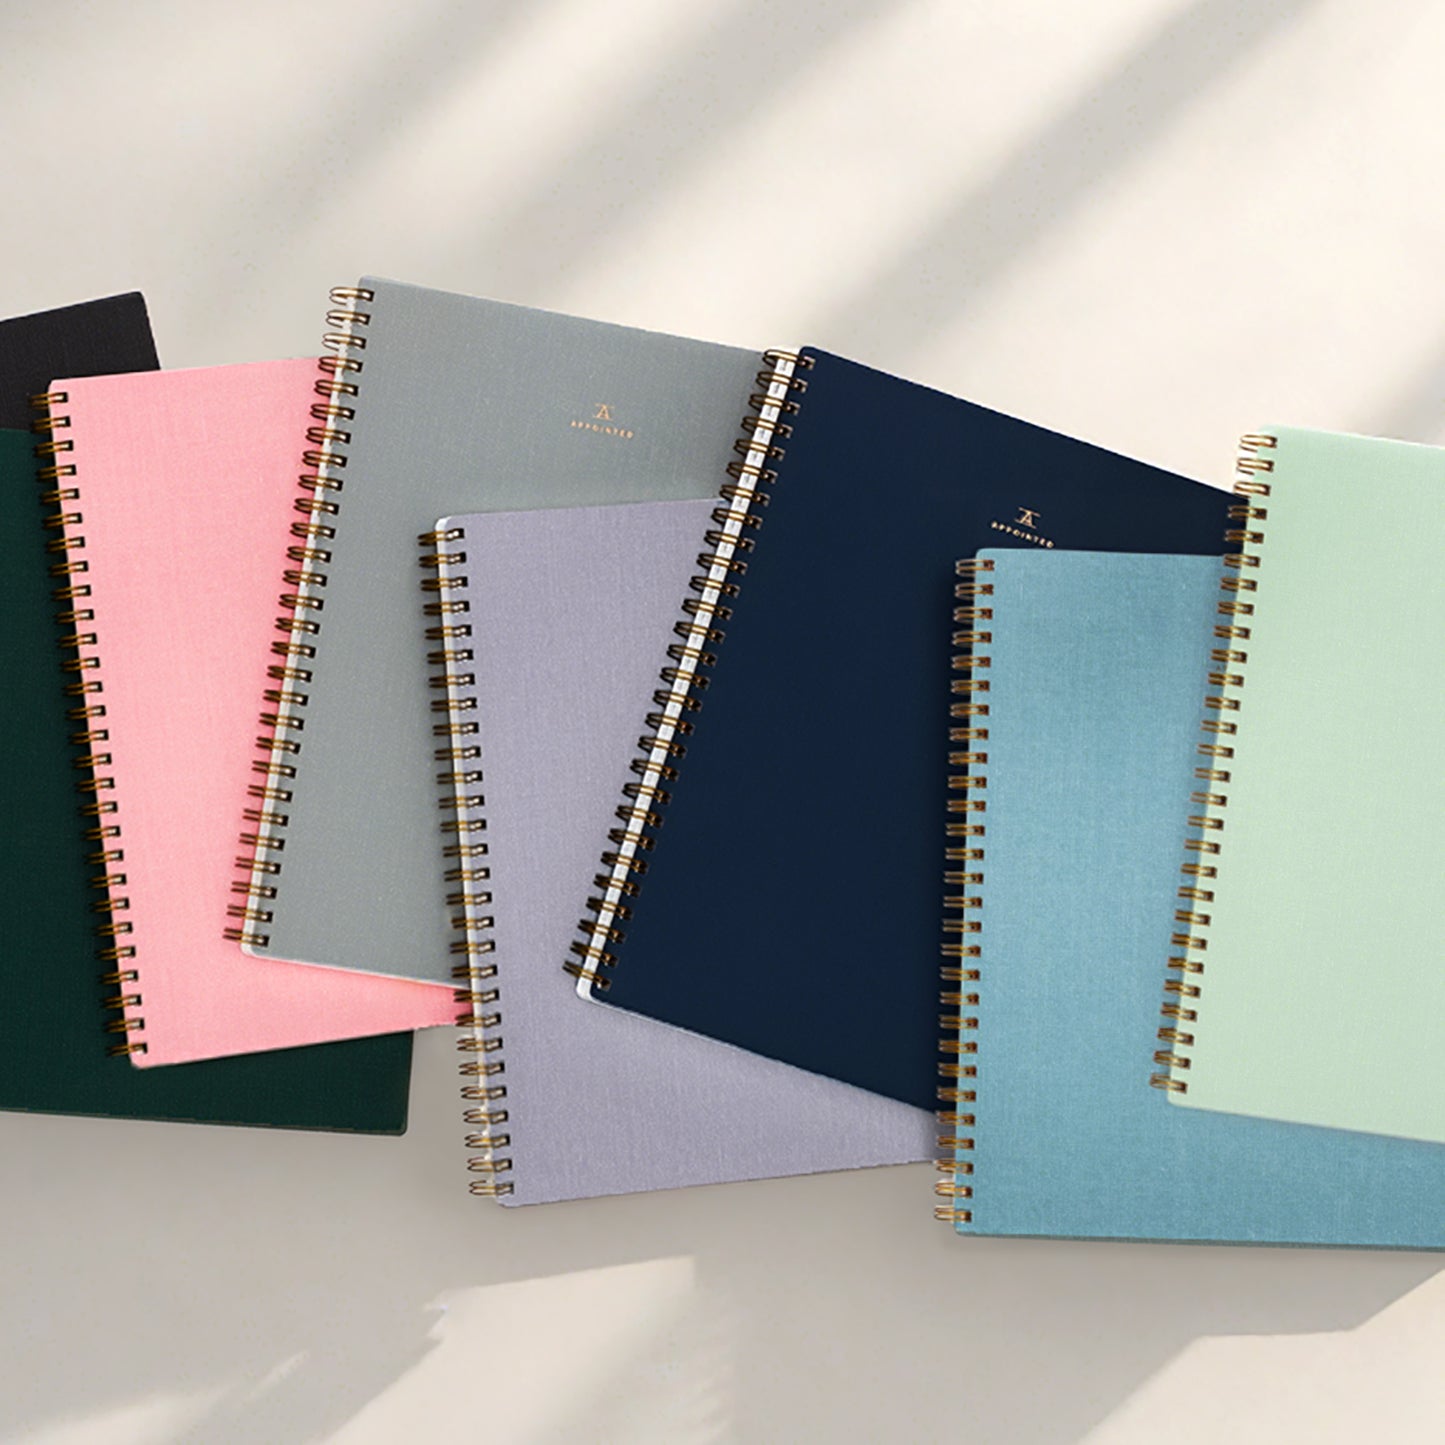 Appointed notebooks